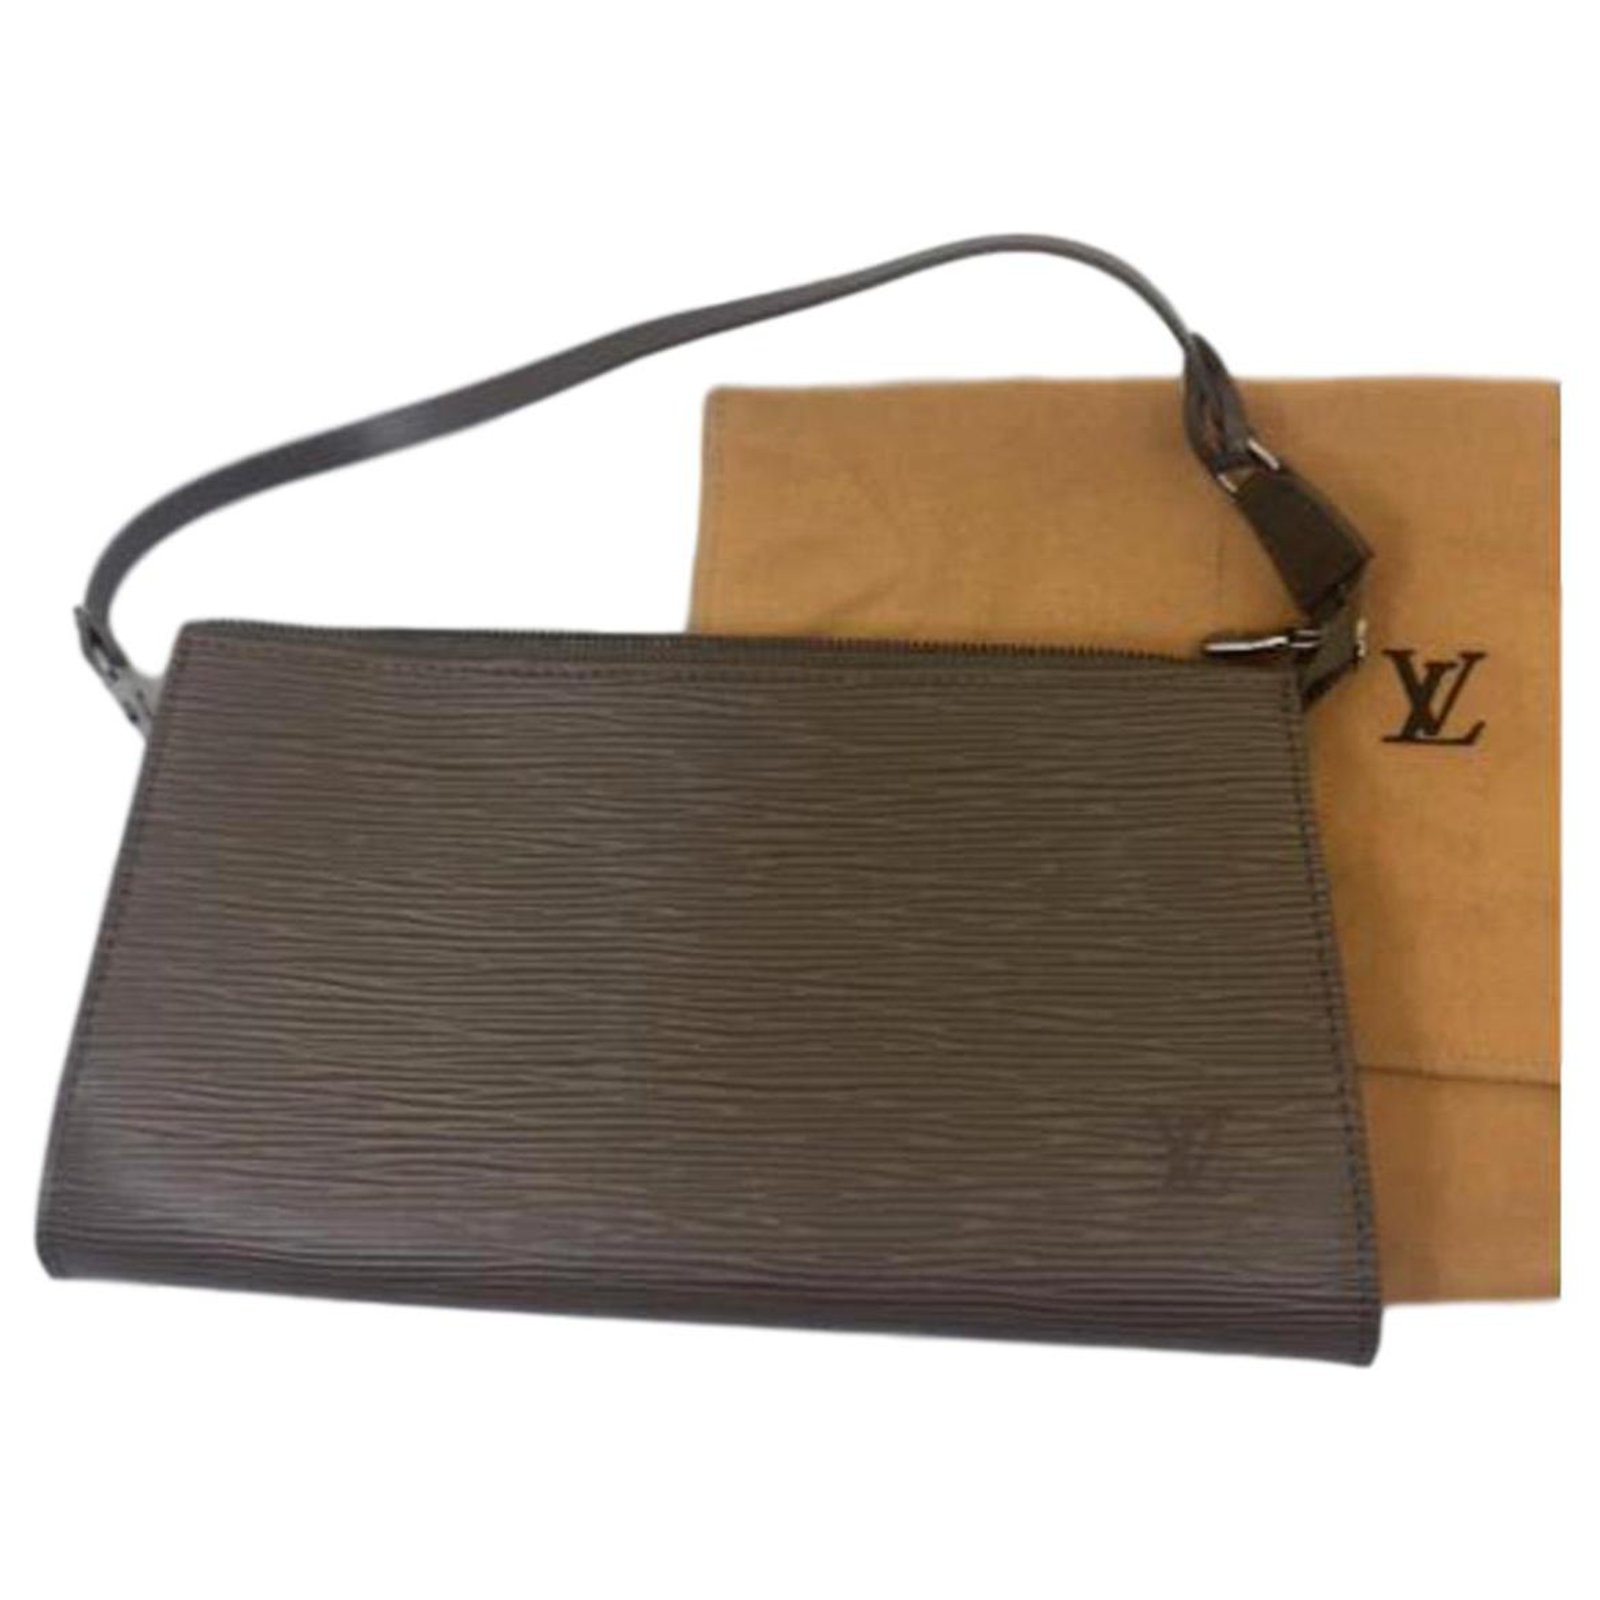 Louis Vuitton, Bags, Louis Vuitton Epi Collection Listed In My Closet